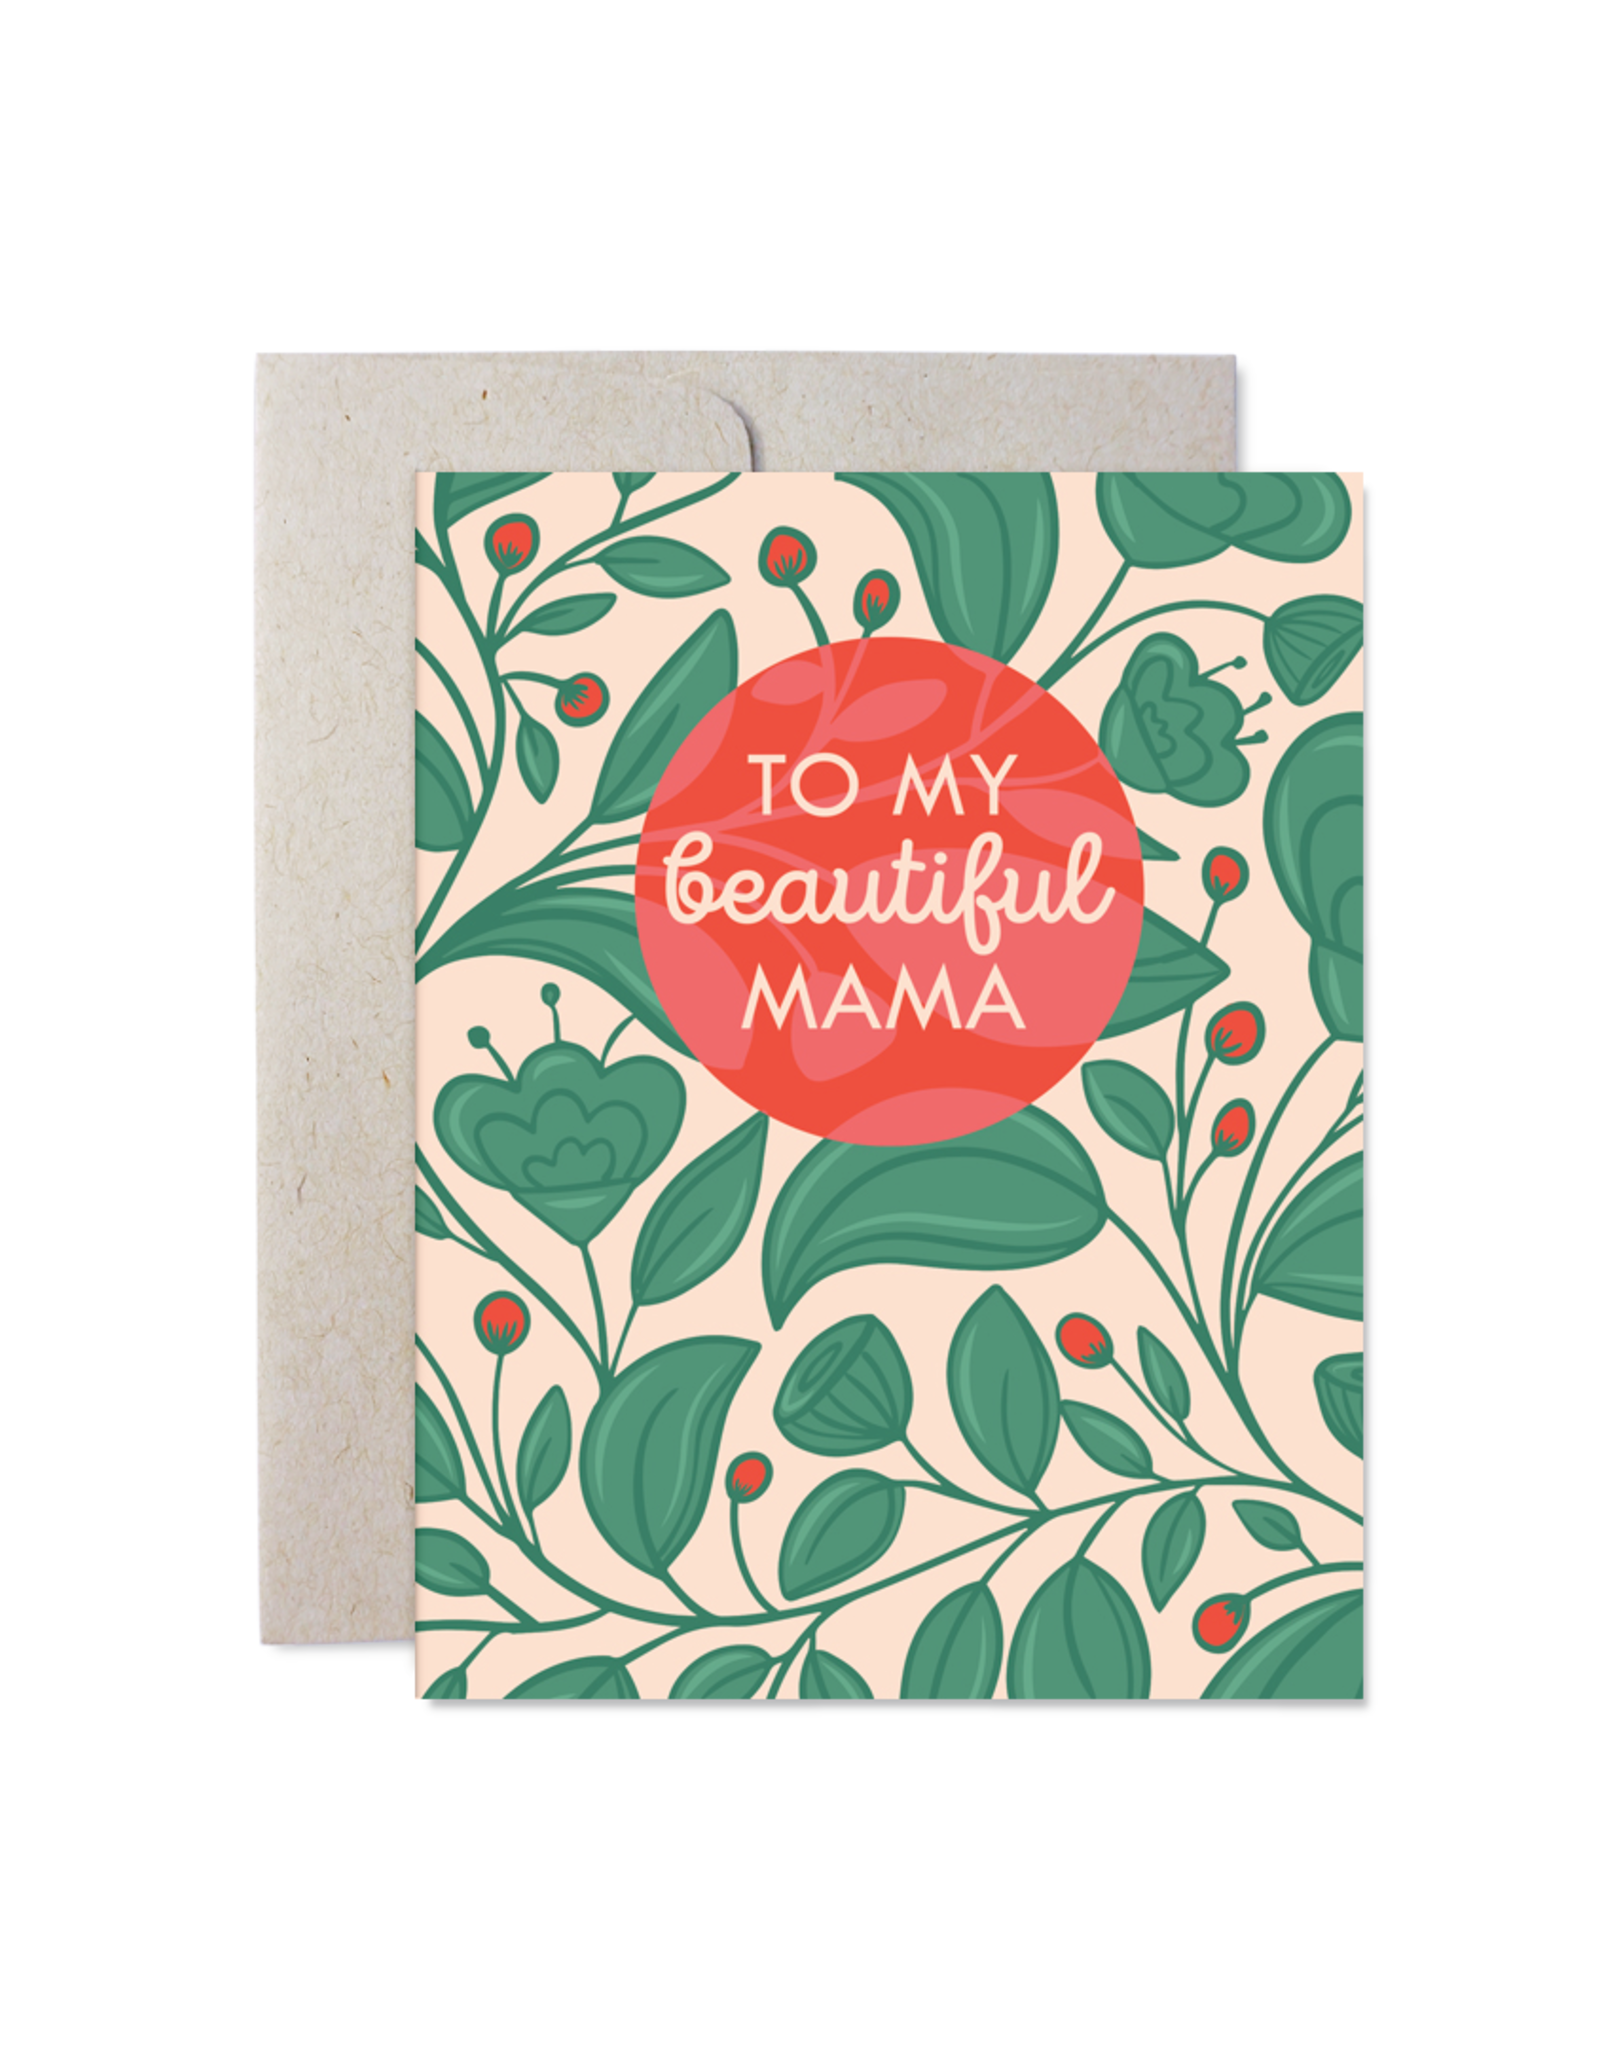 Belle Belette Card - Mama: To My Beautiful Mama